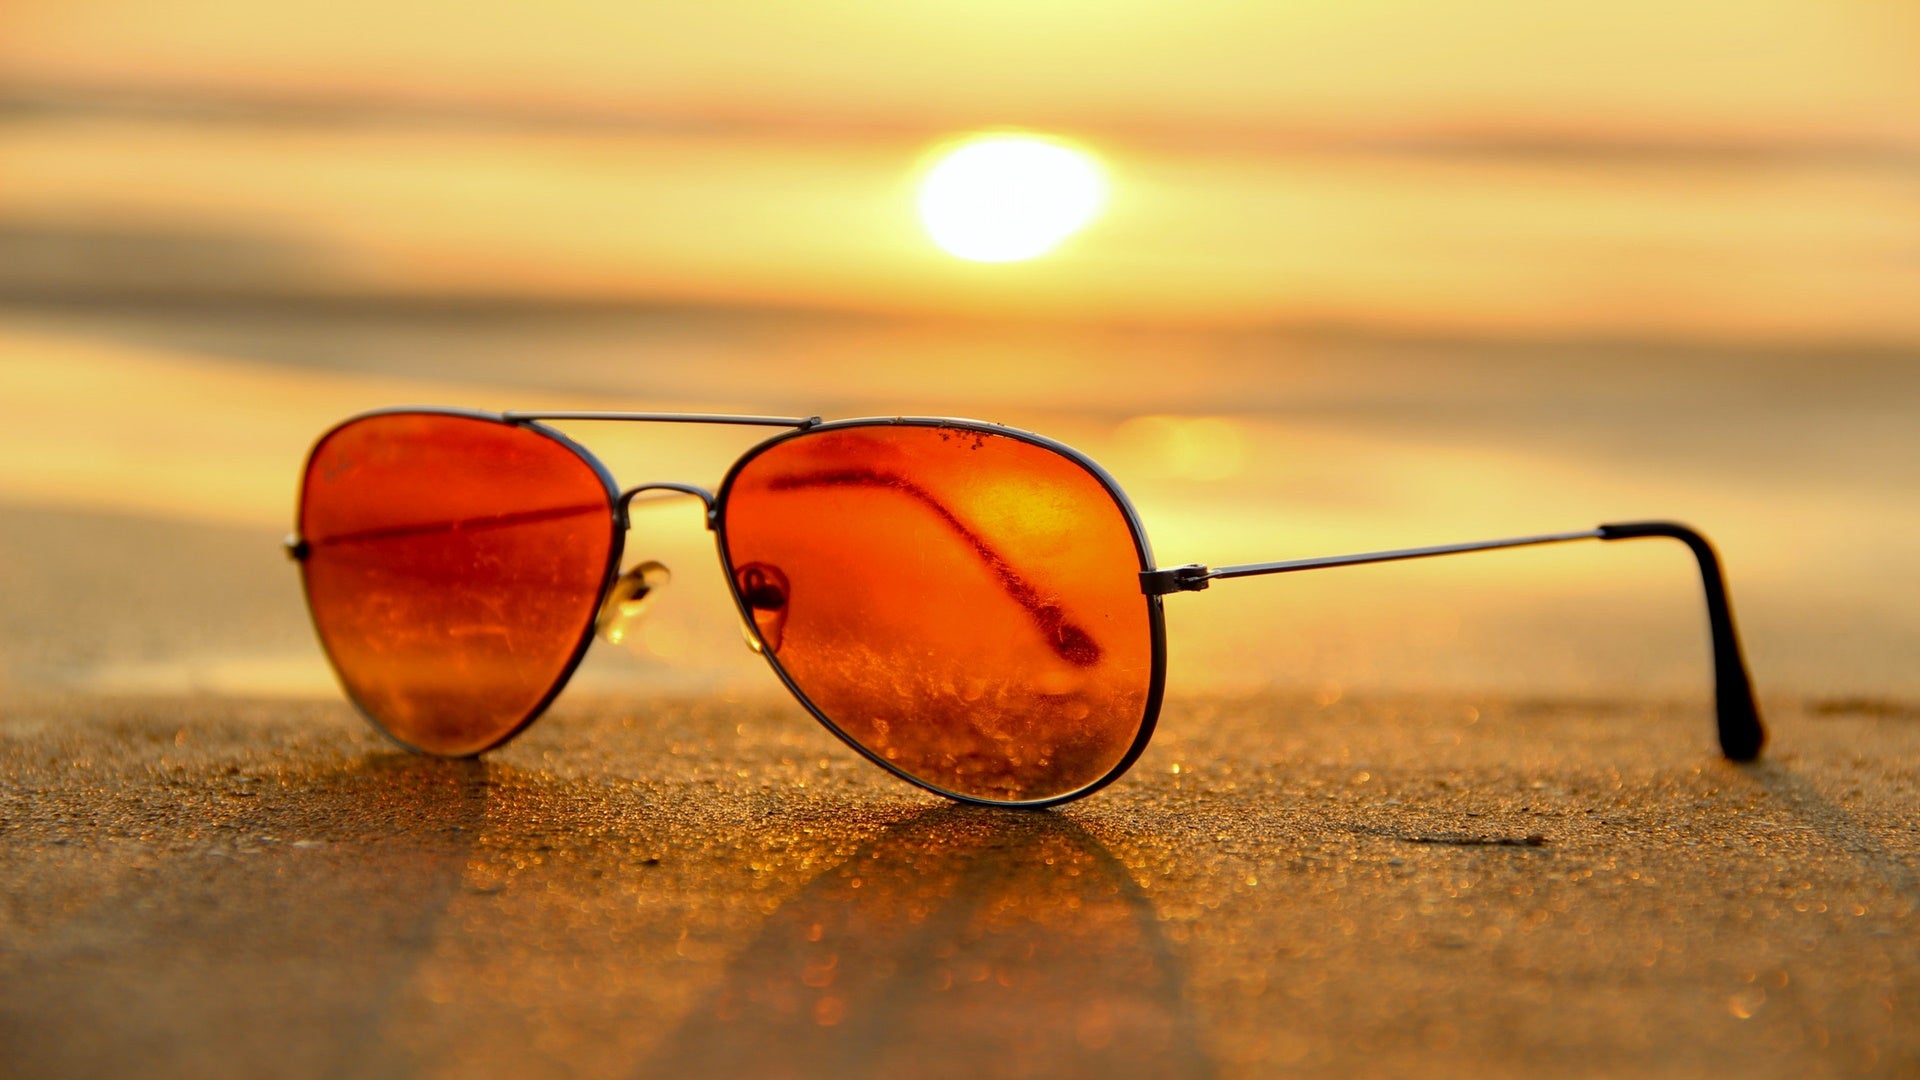 Sunglasses, red lens, on a beach